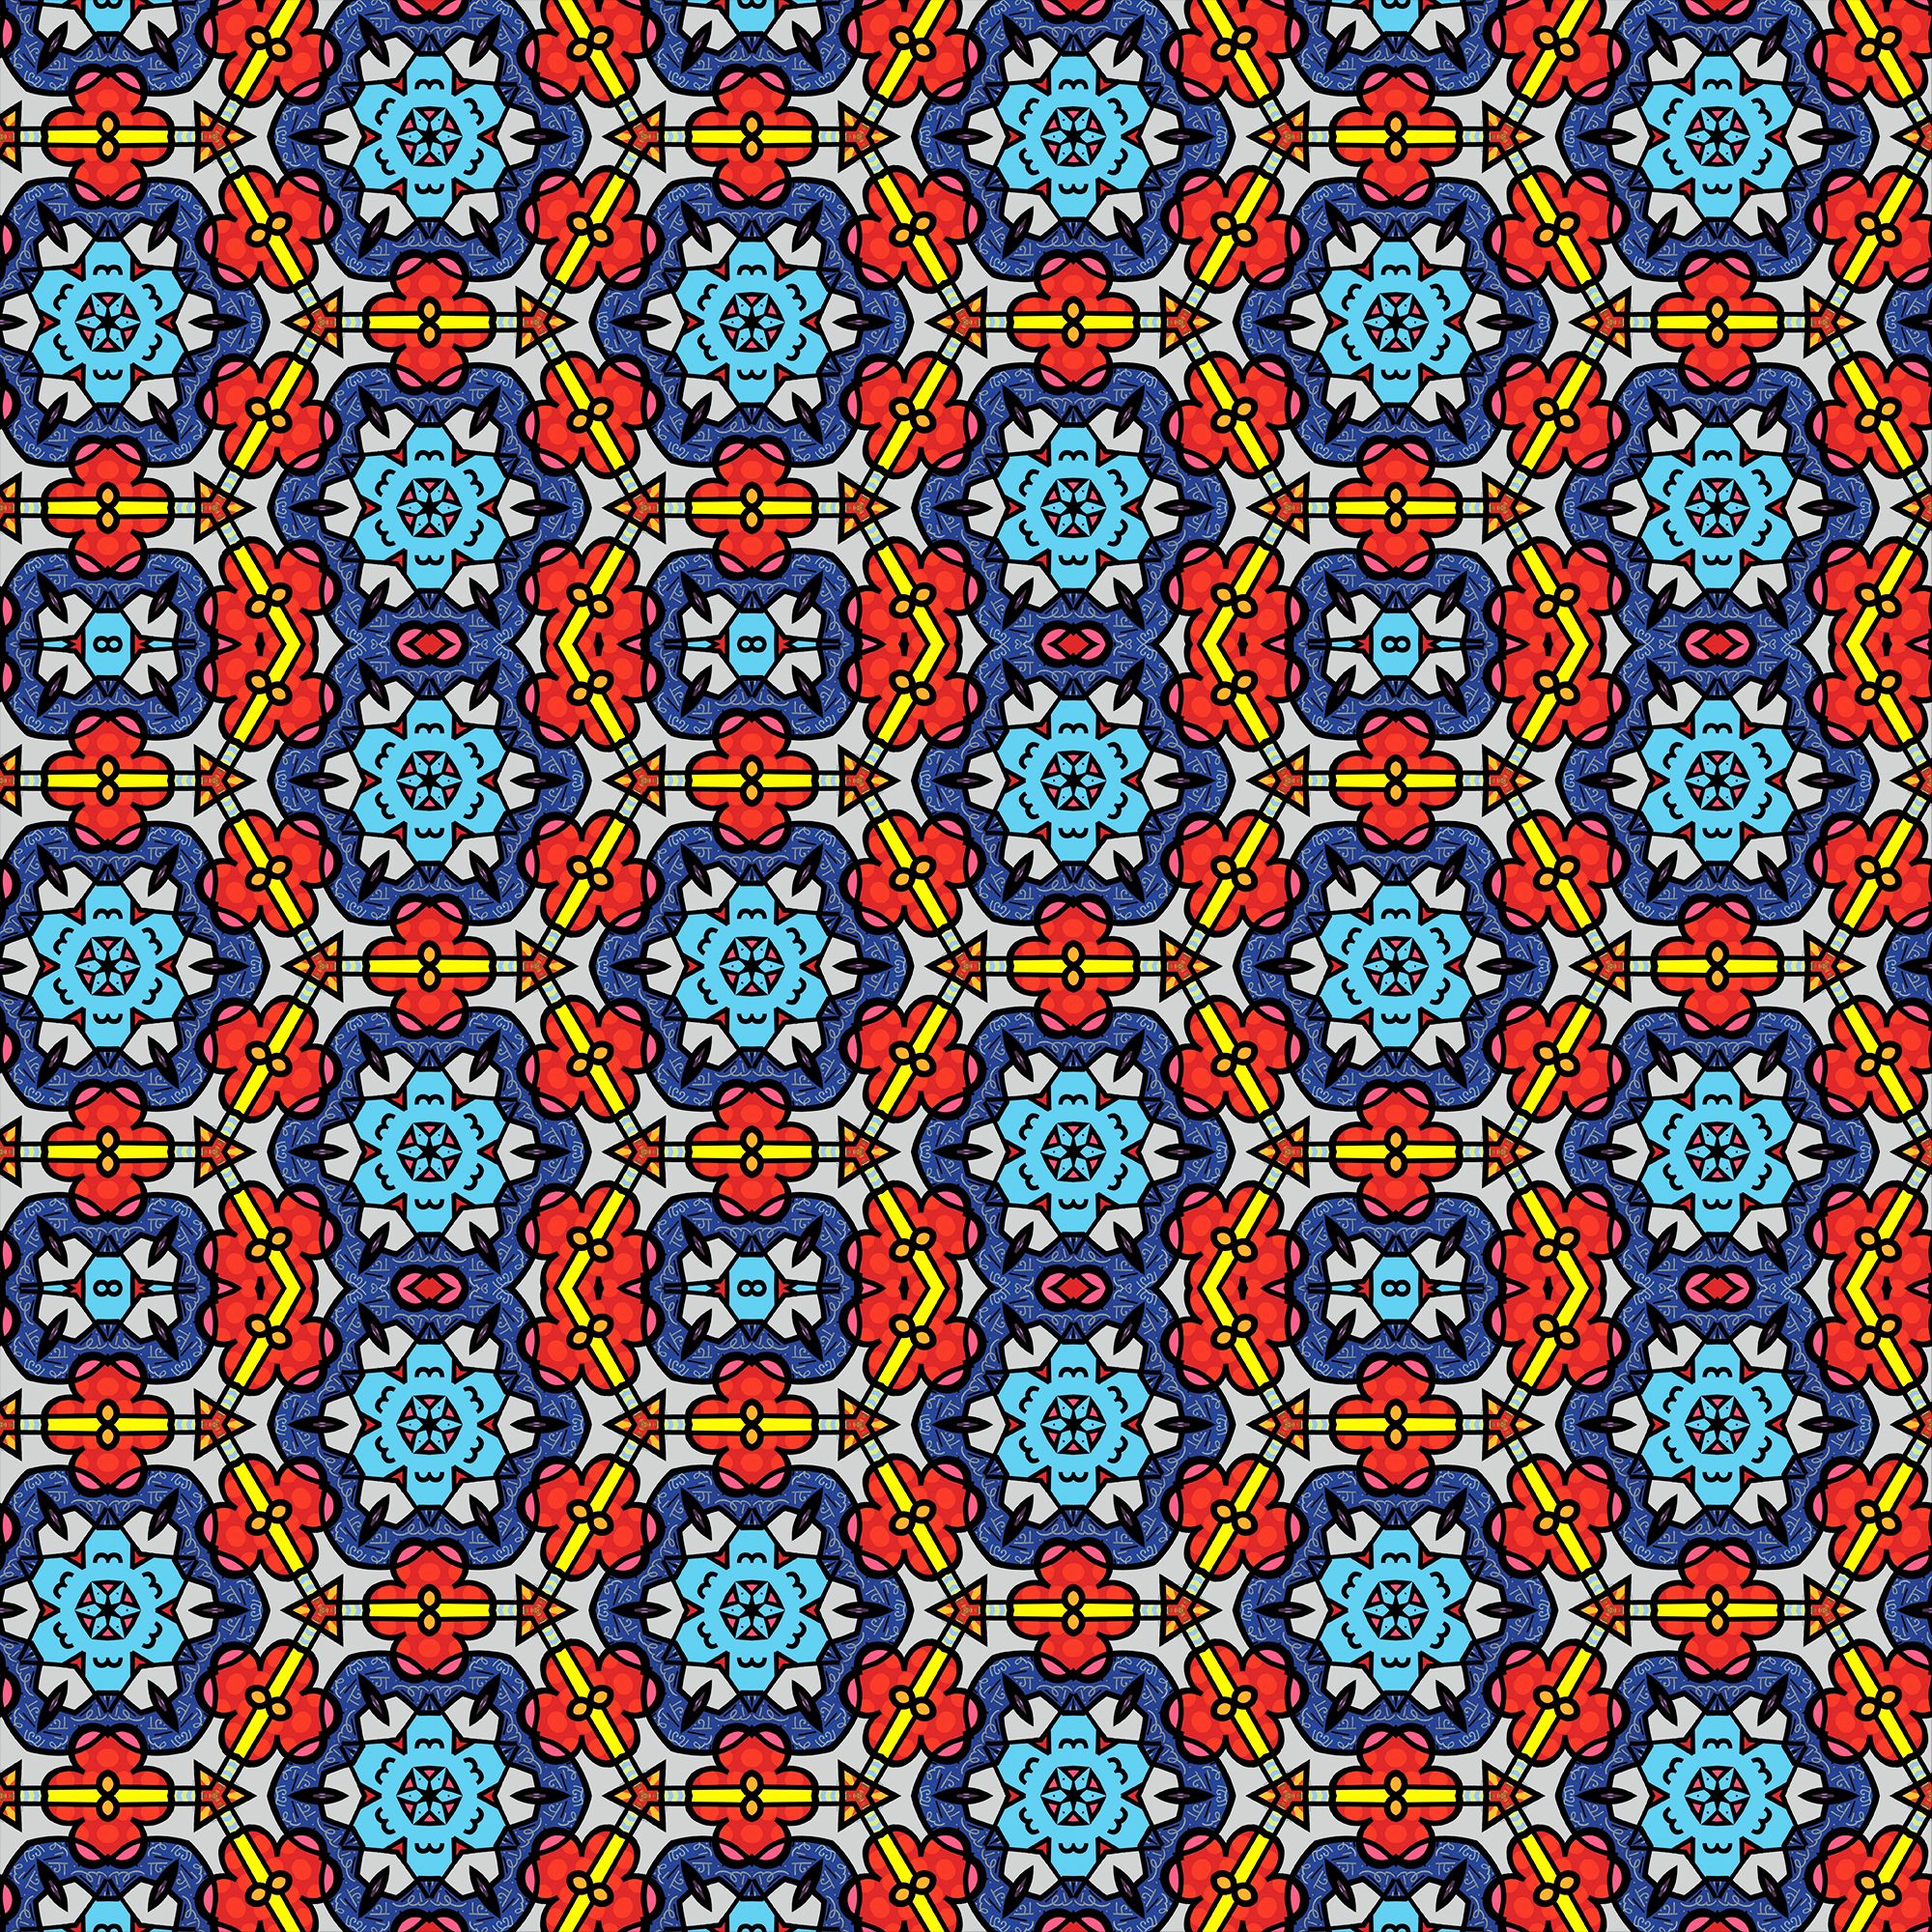 kaleidoscope, forms, patterns, multicolored, motley, texture, textures, form Full HD